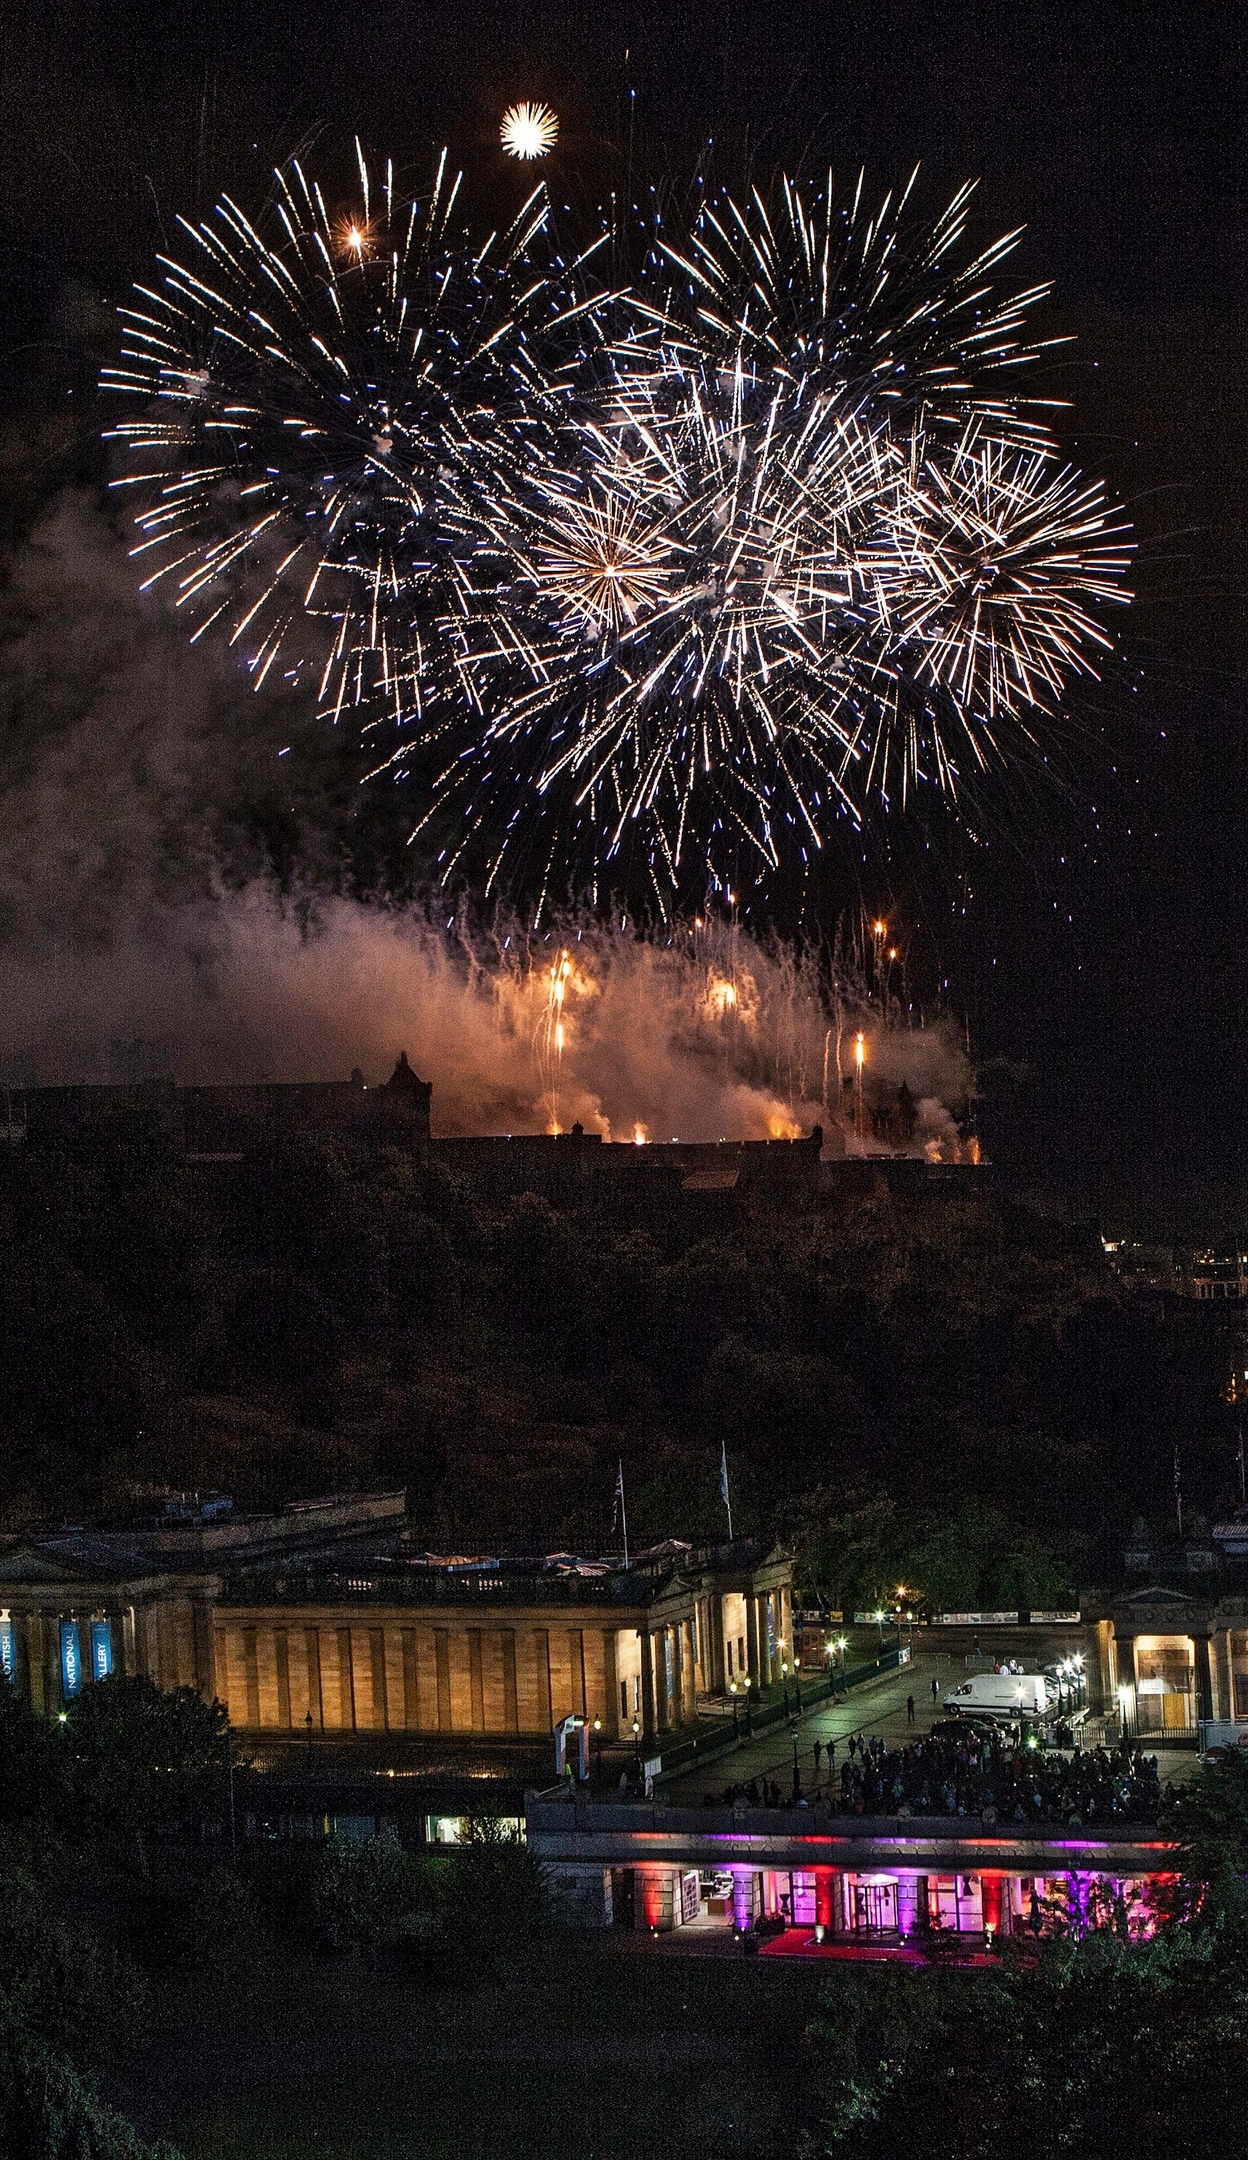 Fireworks light up the sky over Edinburgh to mark the end of the Festivals. The display closes the festival season with a 45 minute concert and more than 400,000 fireworks, choreographed to live orchestral music against the backdrop of Edinburgh Castle. 